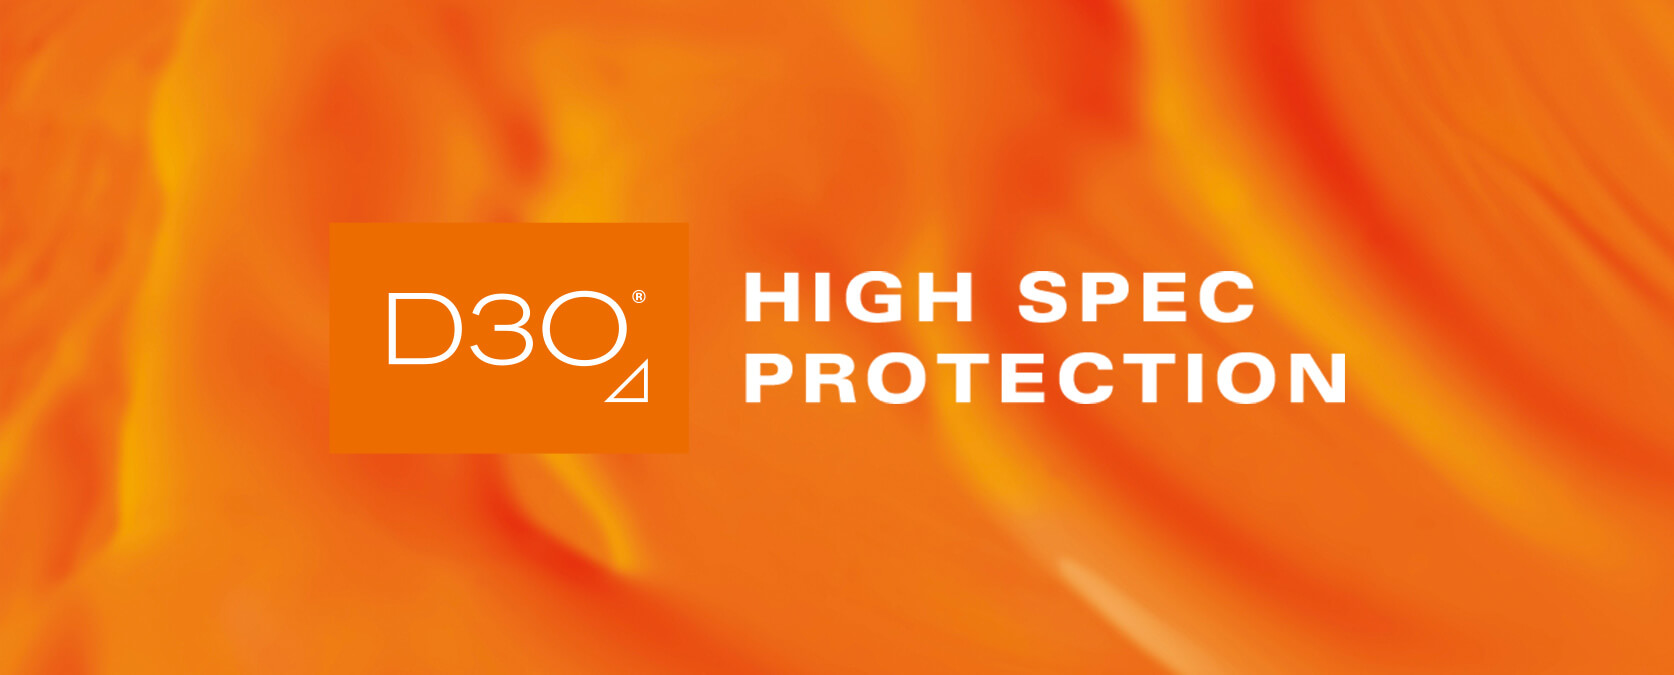 HIGH SPEC PROTECTION